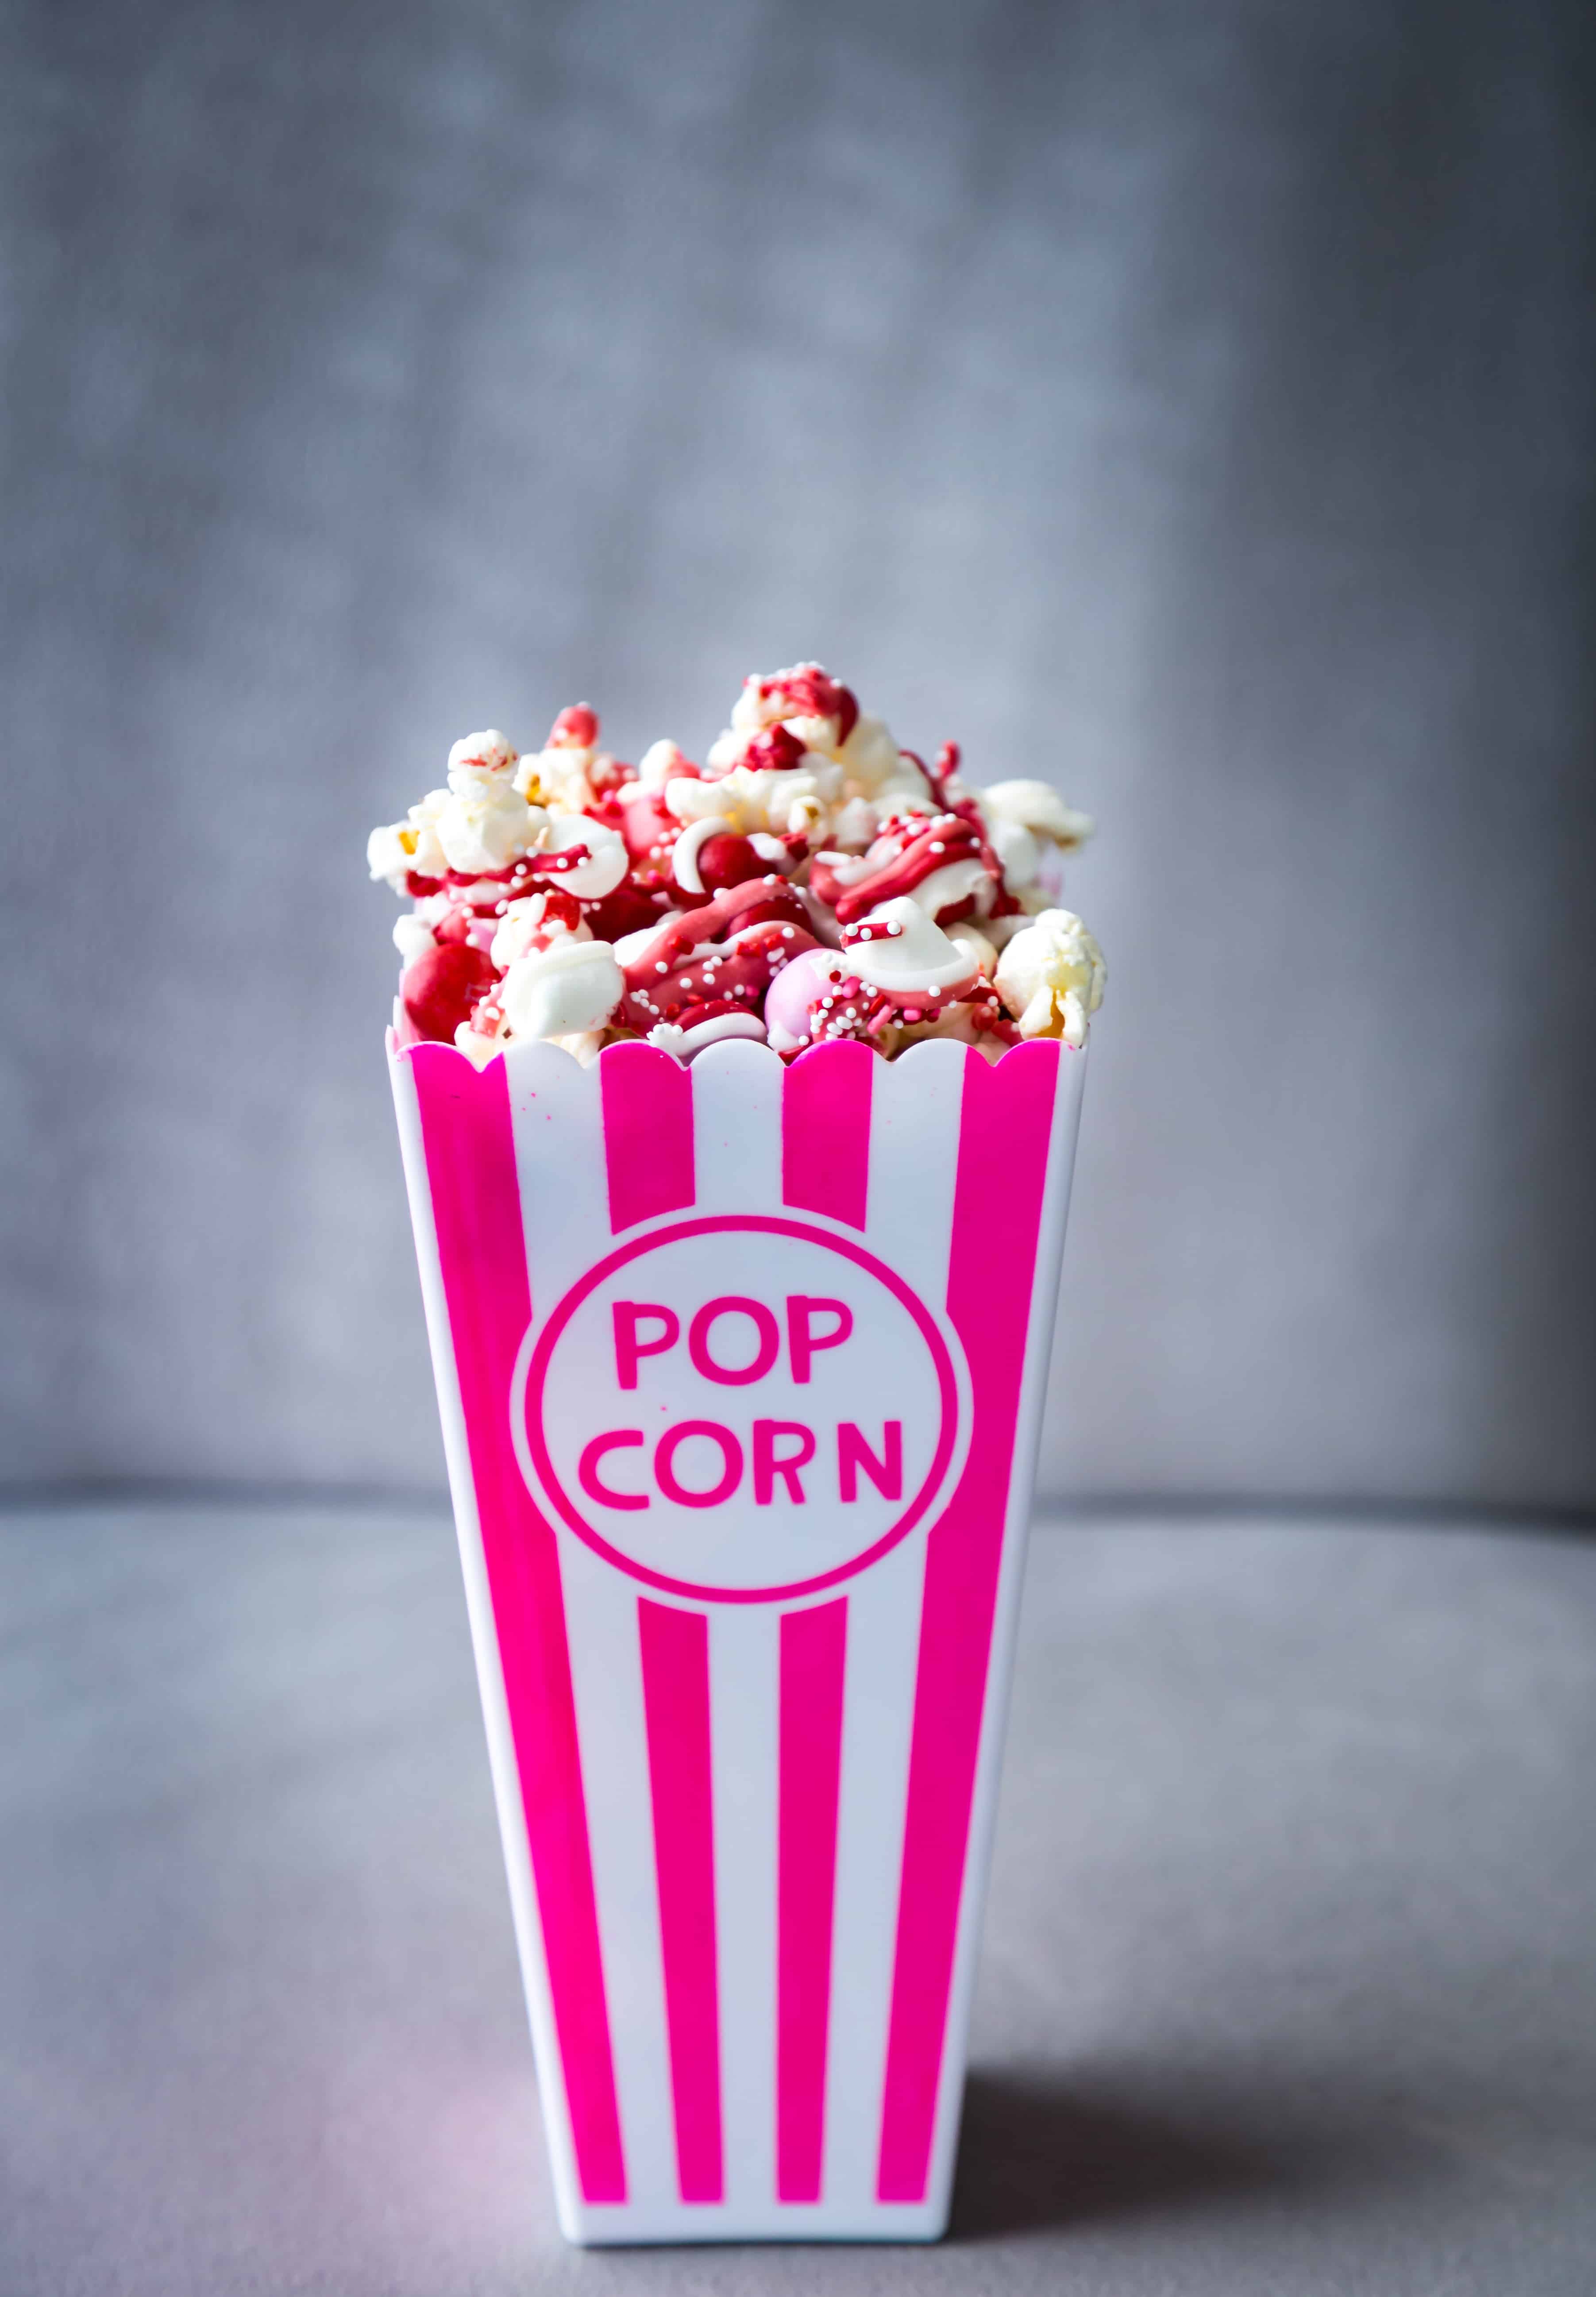 Chocolate Drizzled Popcorn in a pink popcorn container.